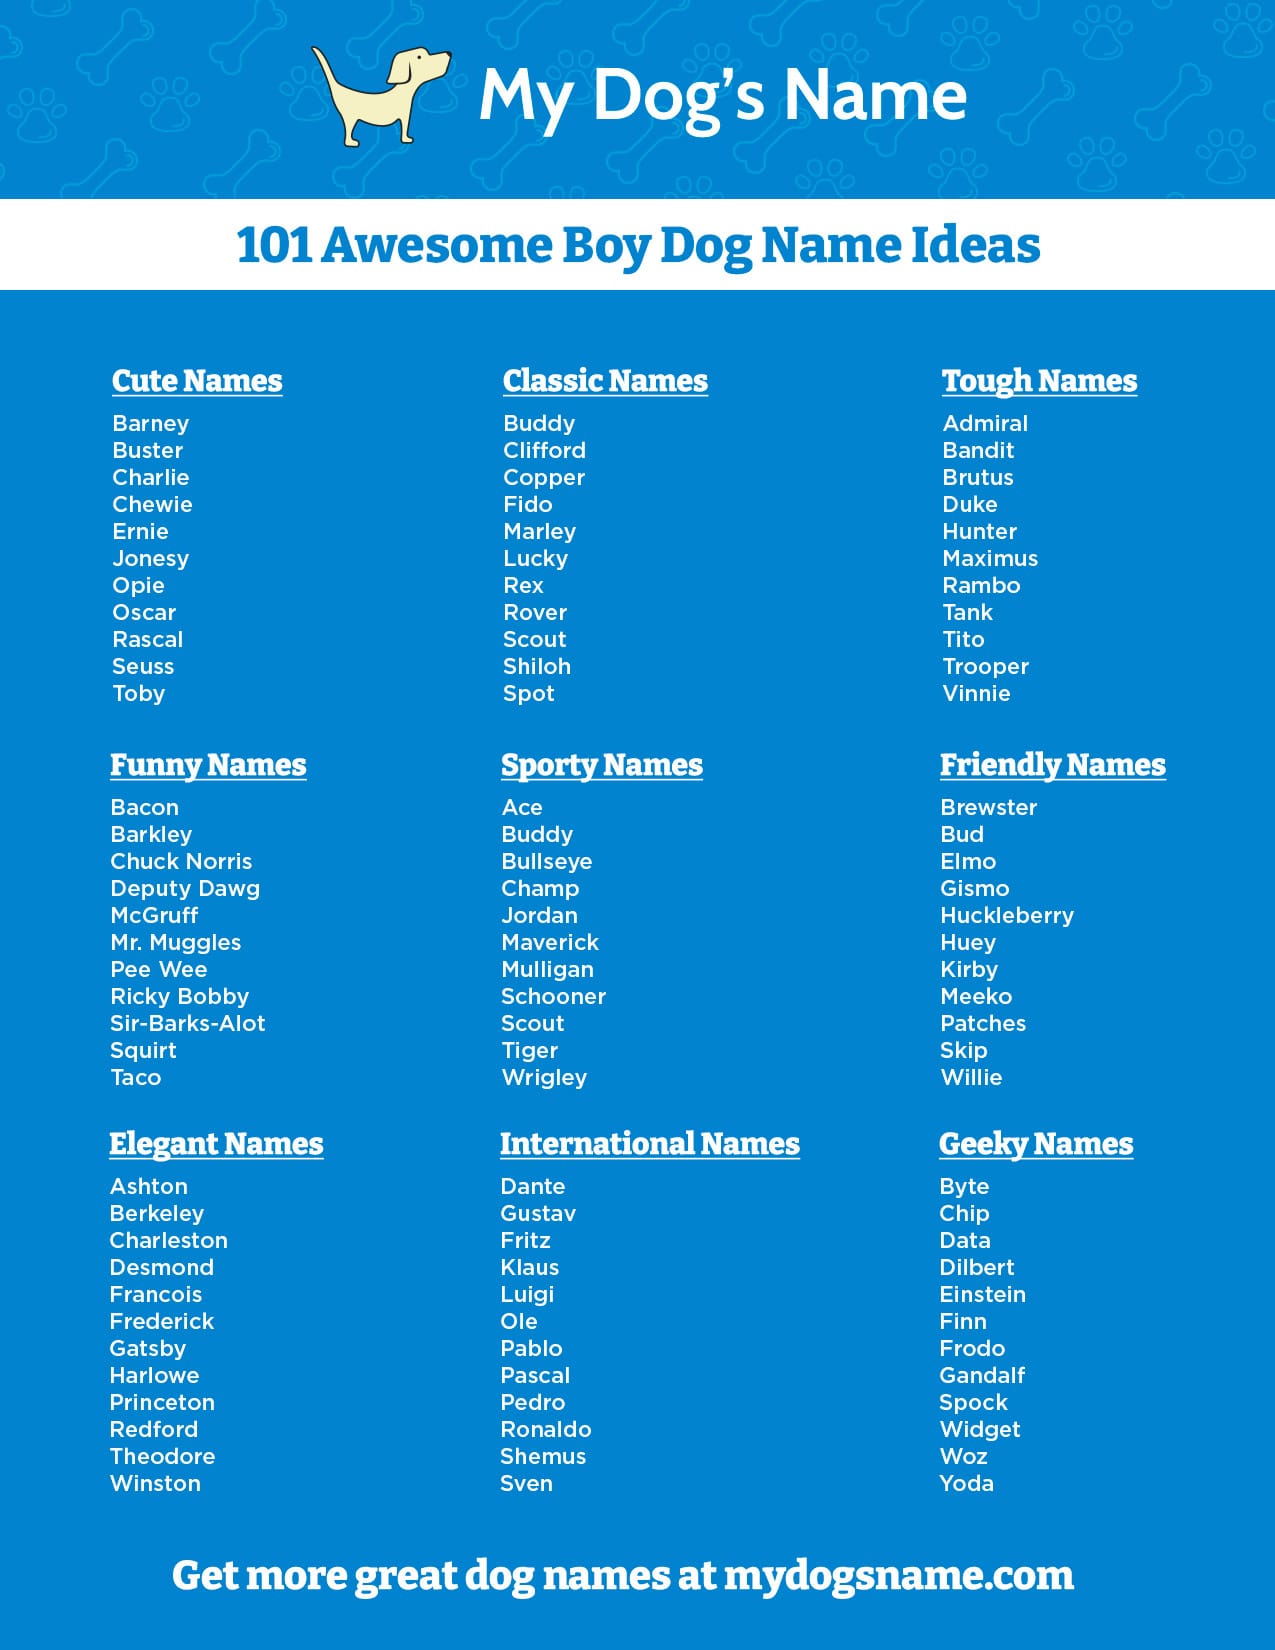 Really cool pet names